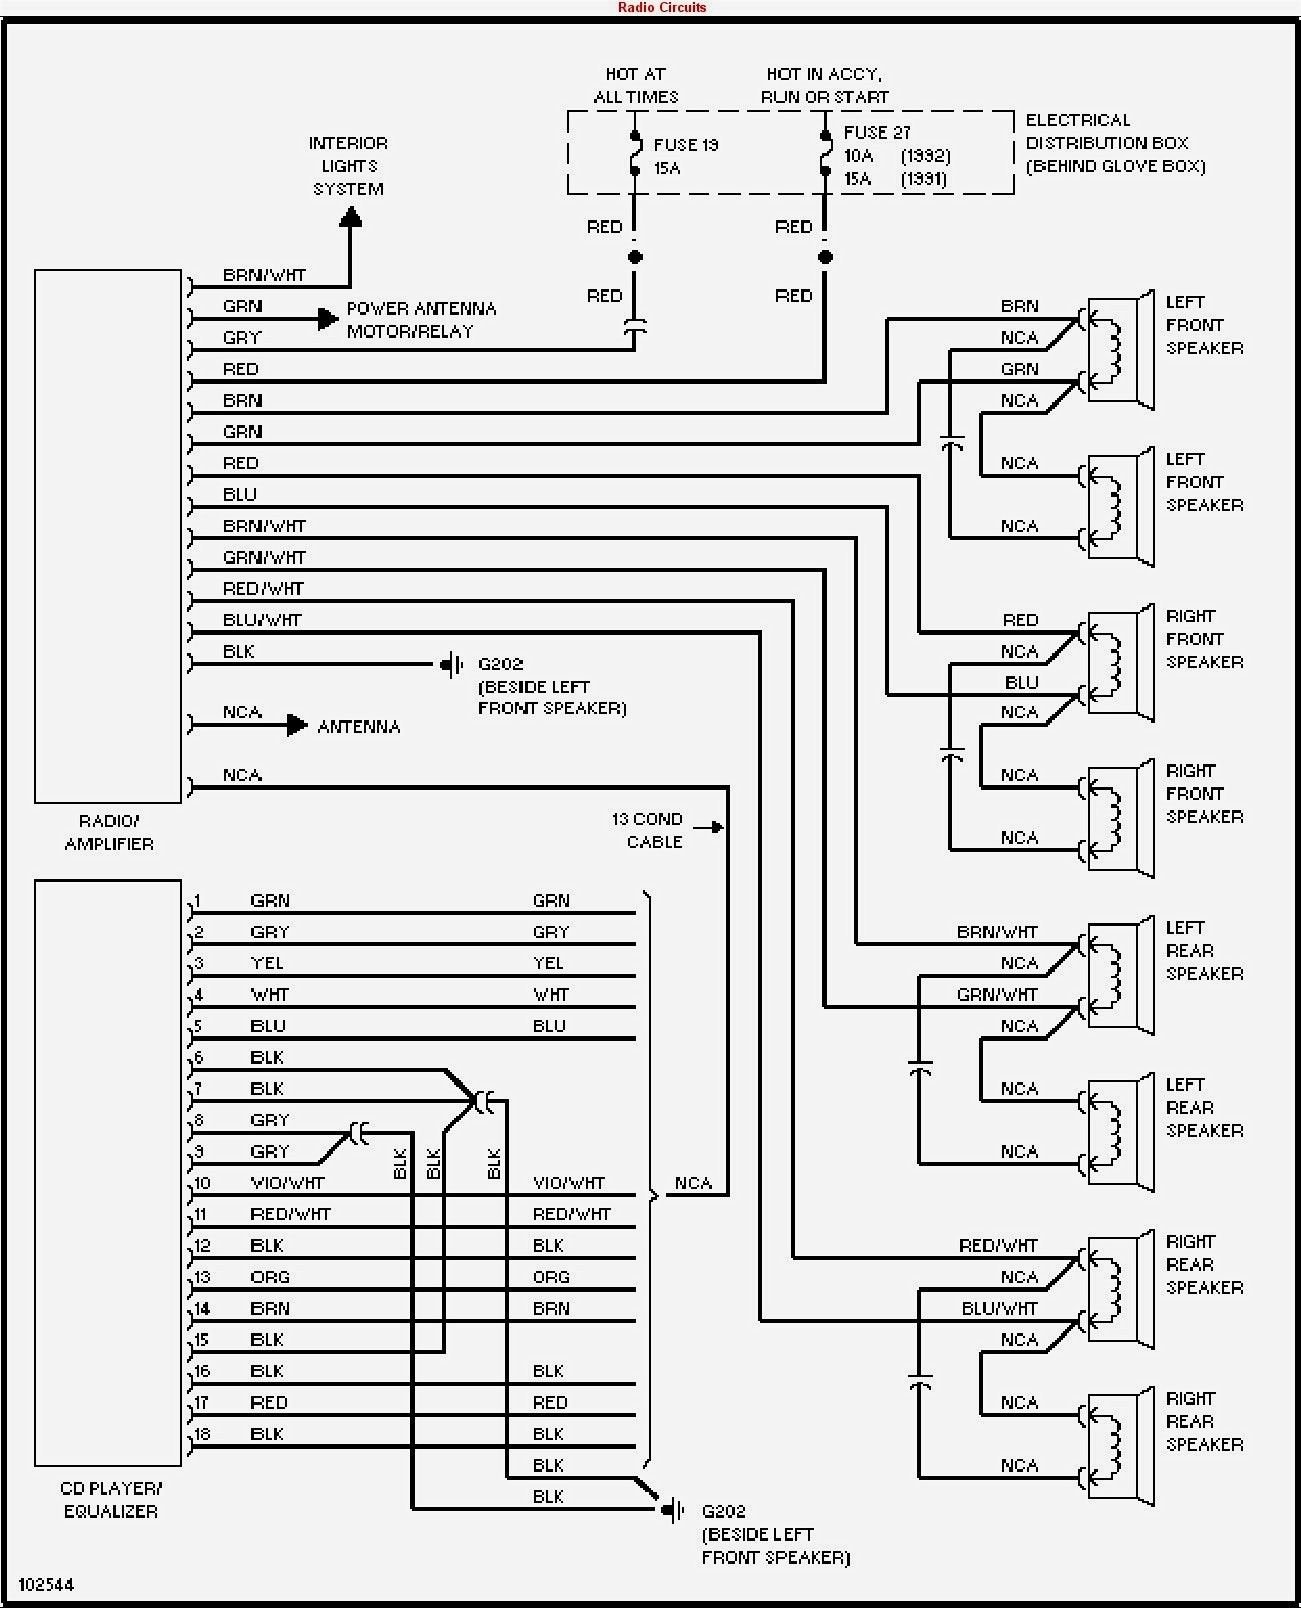 1999 Chevy Silverado 1500 Stereo Wiring Diagram Schematic And Wiring